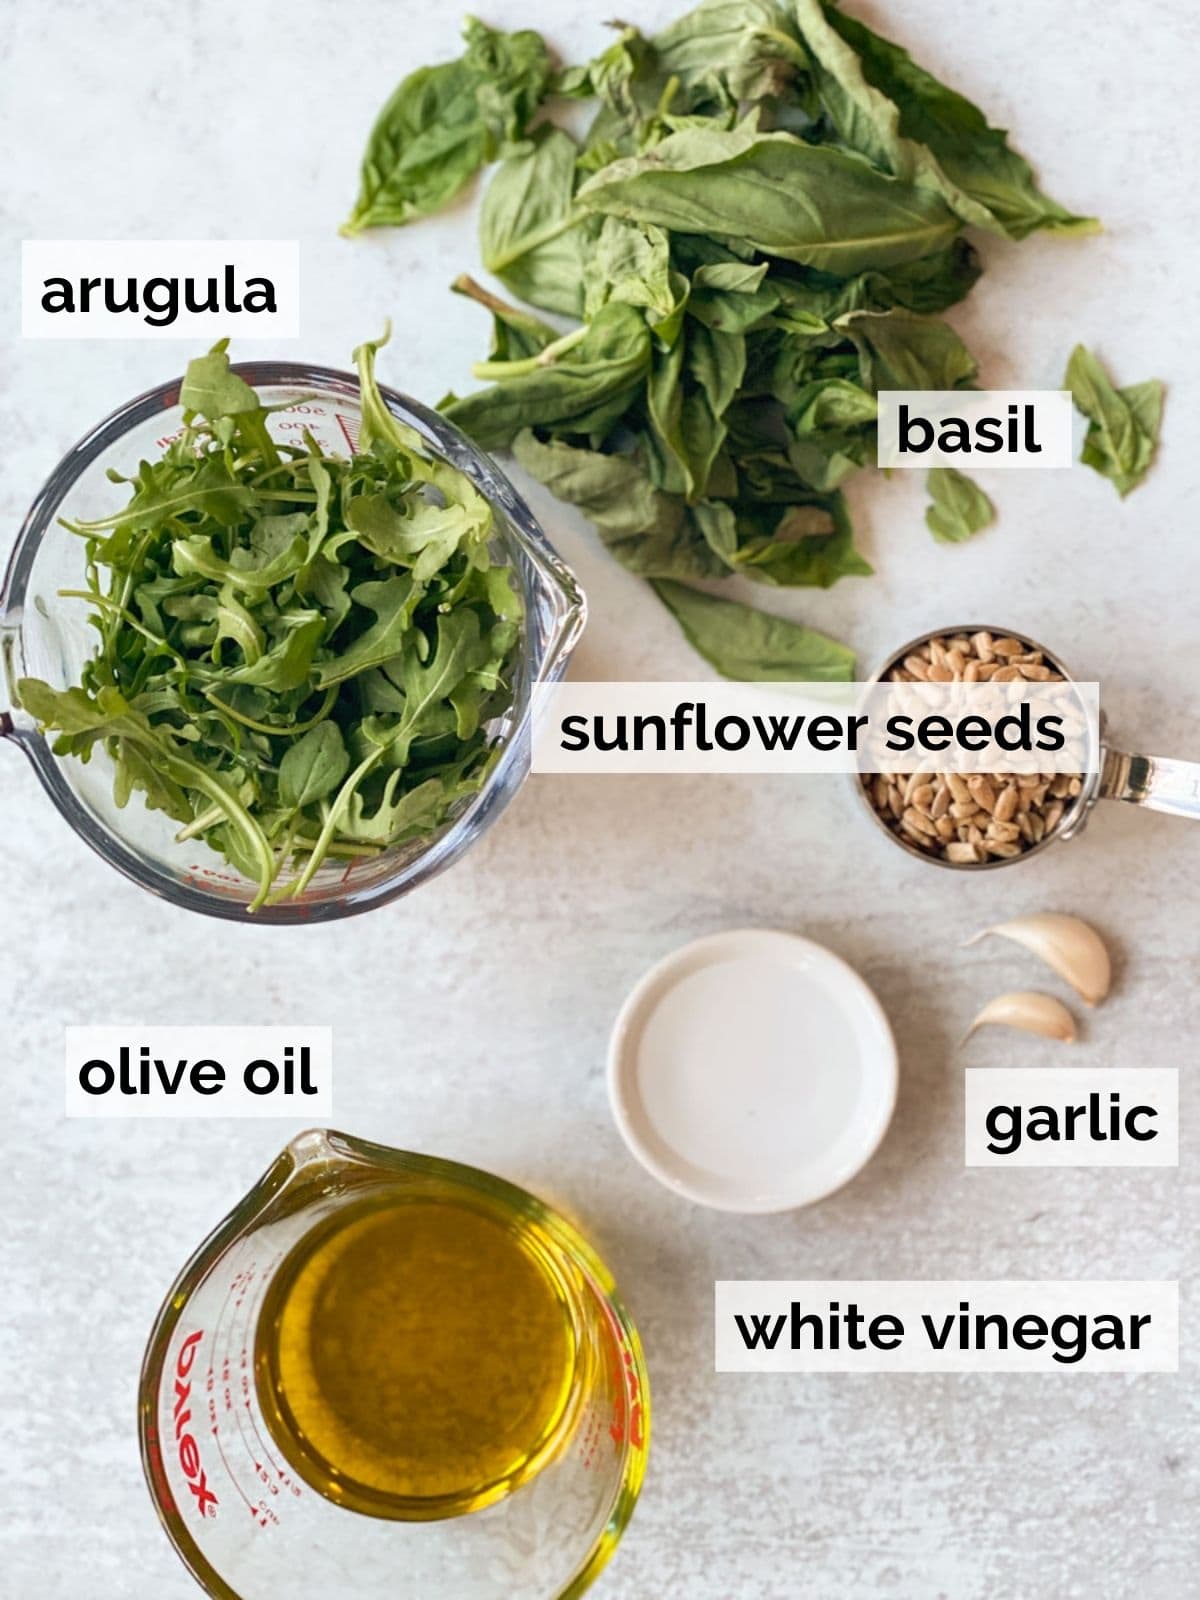 Ingredients for pesto with sunflower seeds.